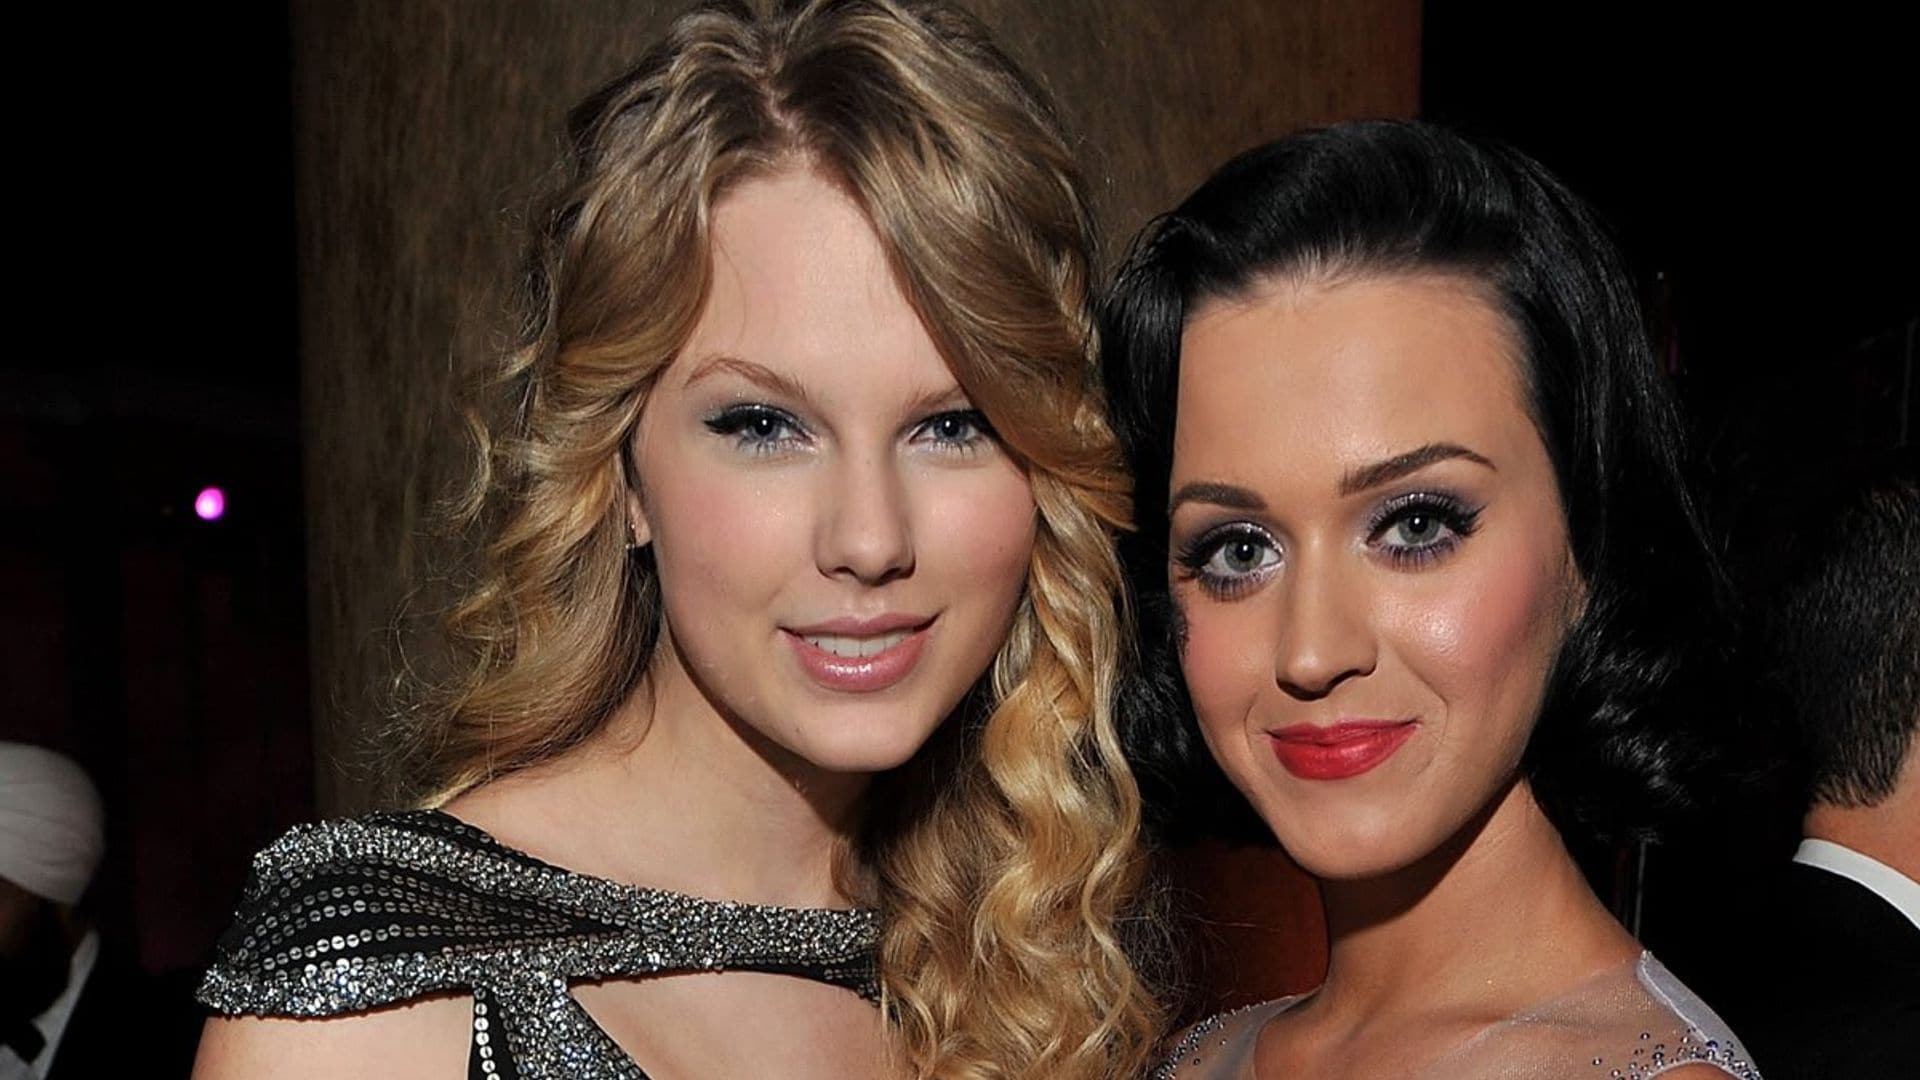 Katy Perry hints at a future collaboration with former foe Taylor Swift